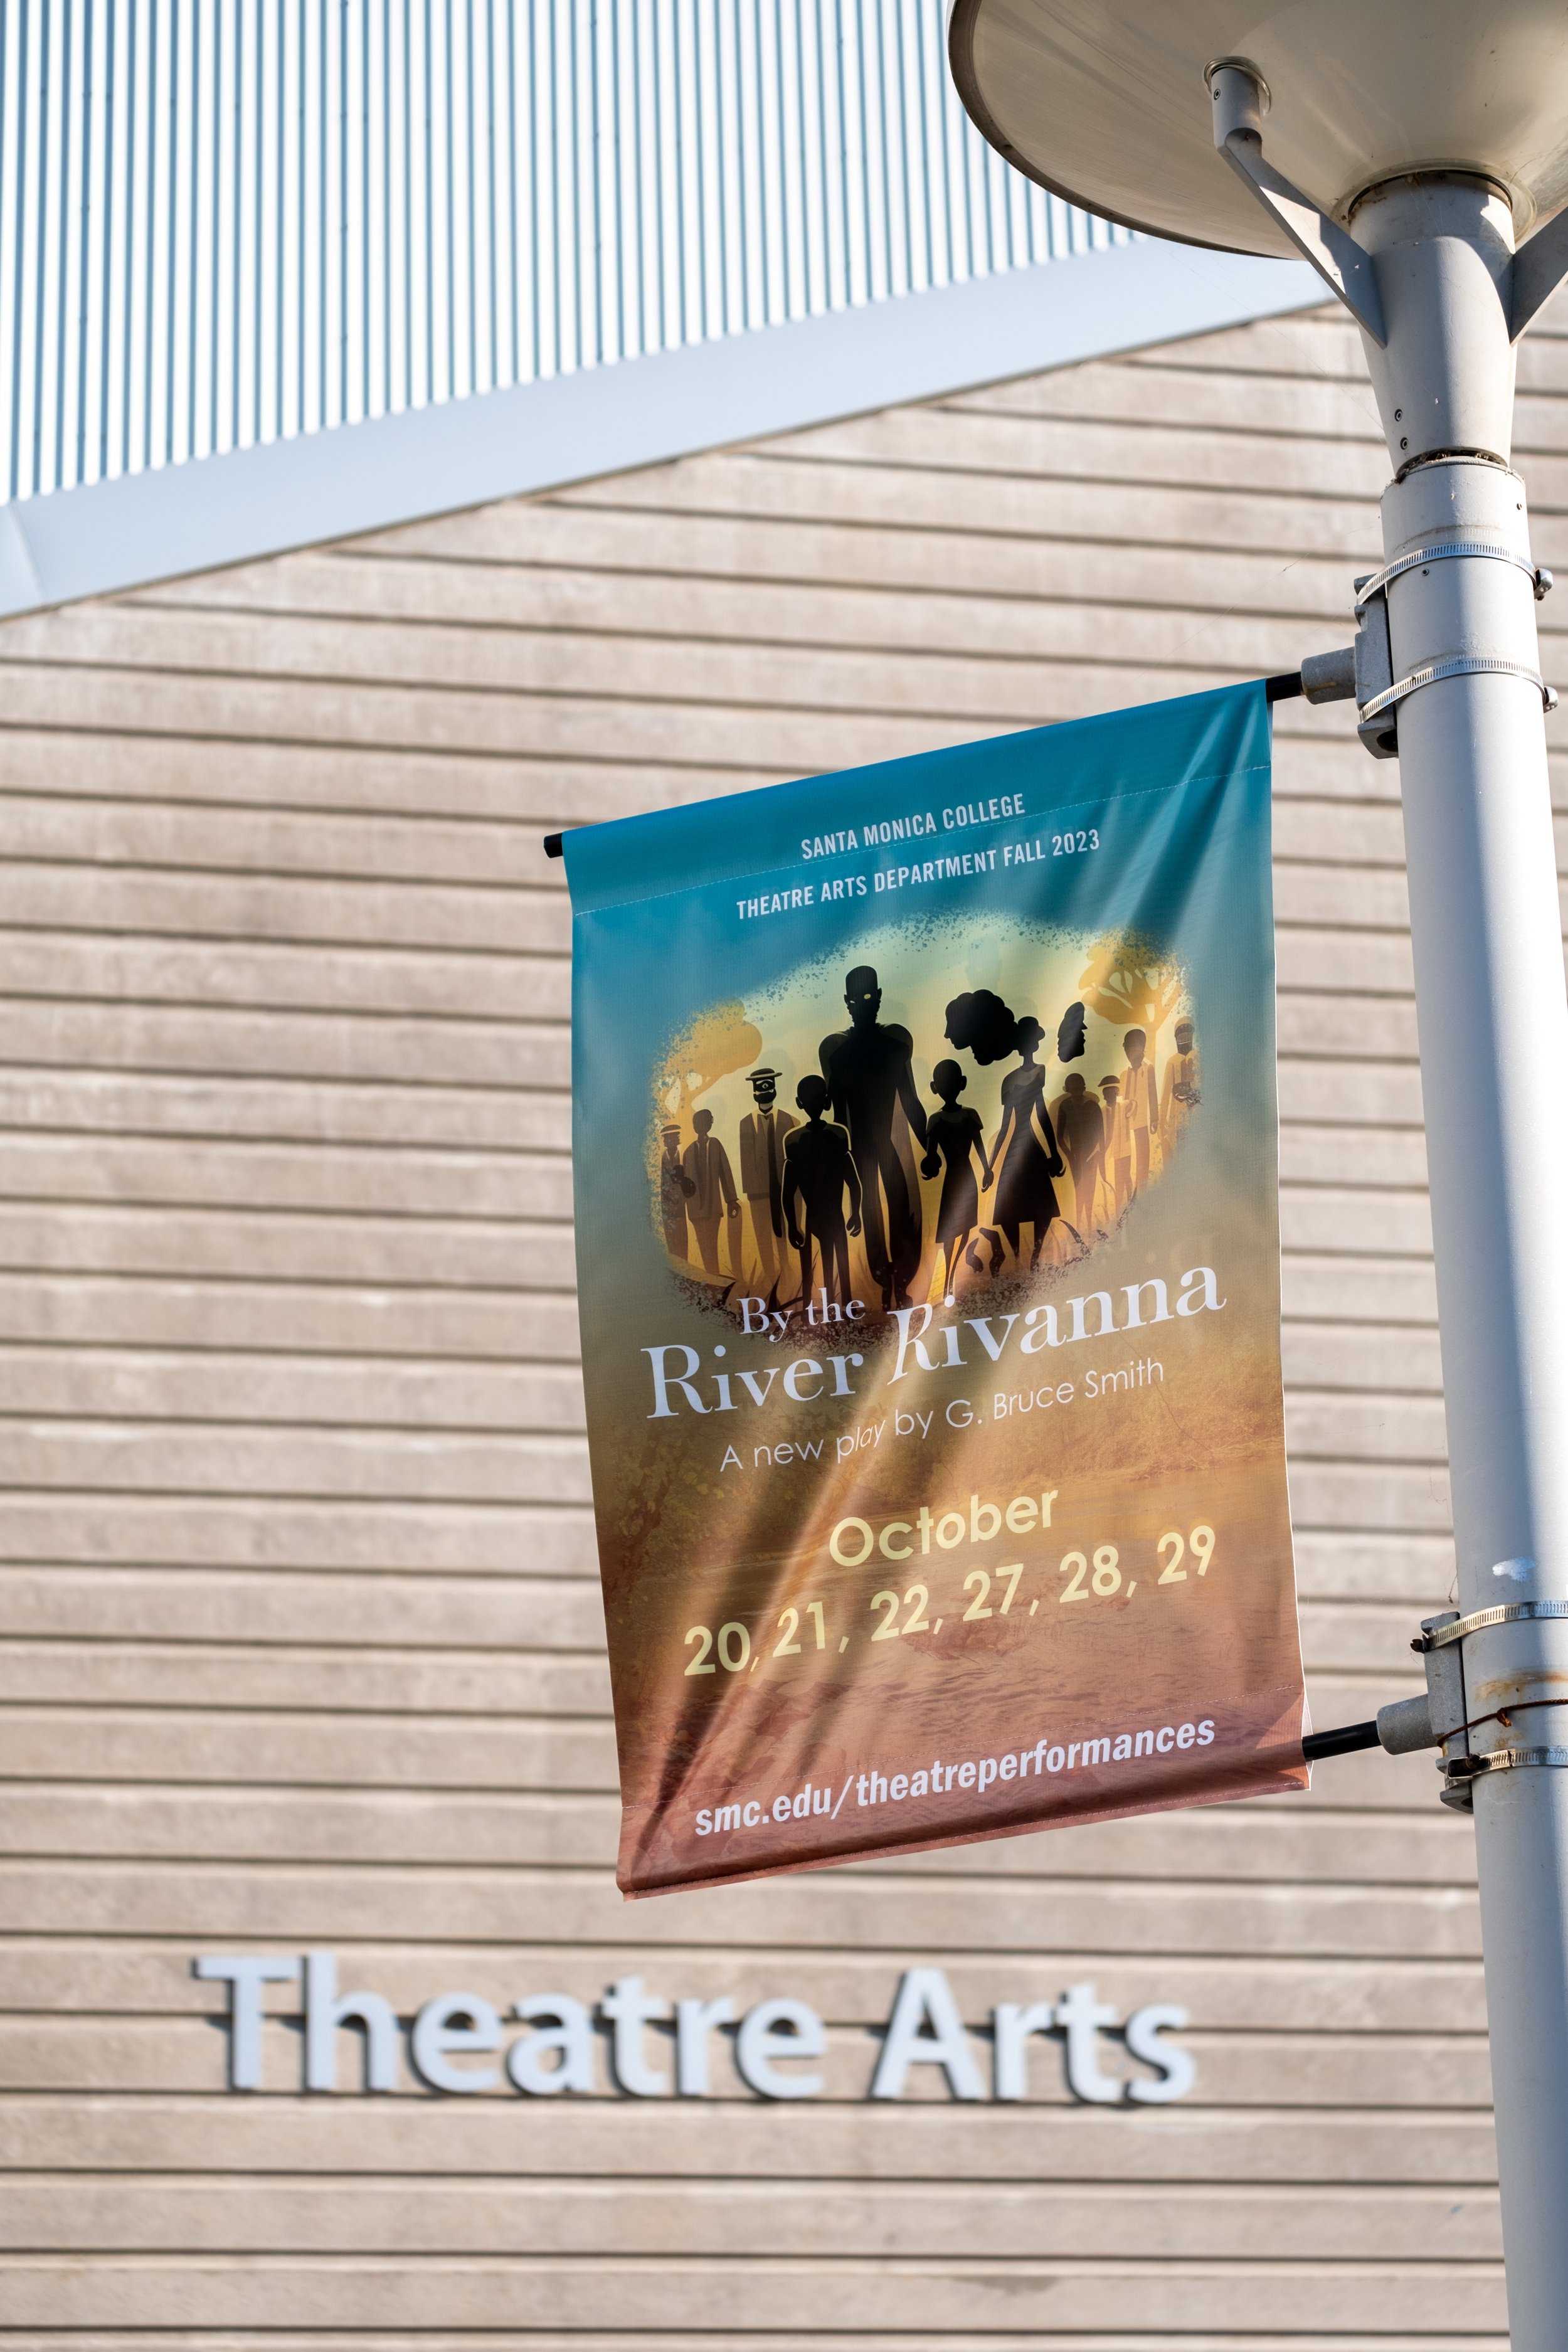  A close up of the banner advertising the play, "By the River Rivanna," in front of the Theatre Arts building on the main campus at Santa Monica College in Santa Monica, Calif. on Monday, Oct. 23, 2023. (Akemi Rico | The Corsair) 